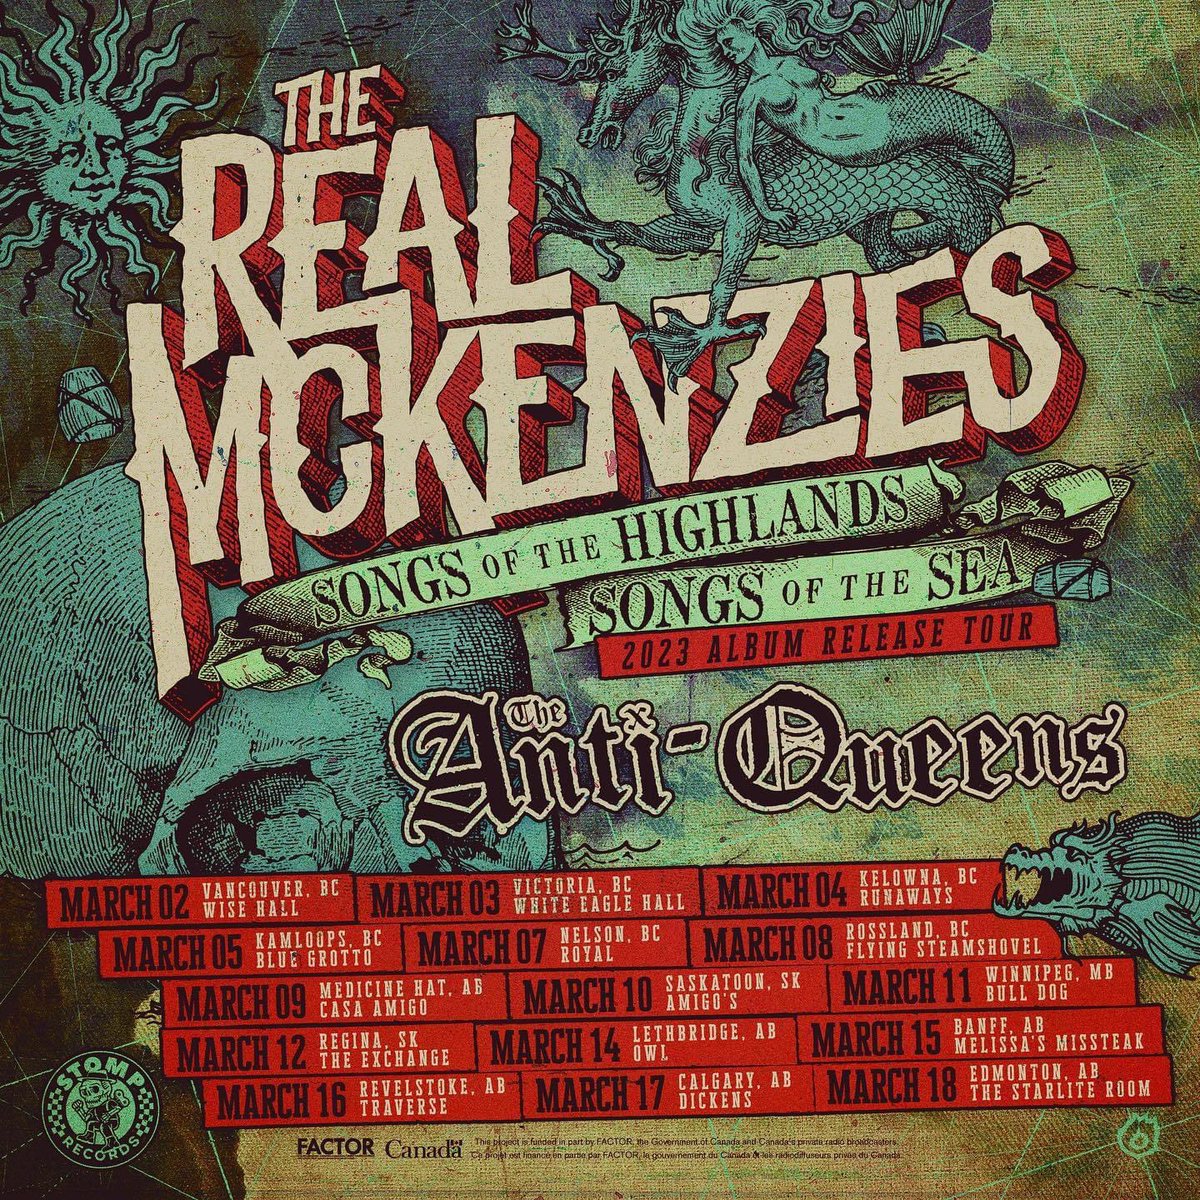 ⚡️ TOUR ANNOUNCEMENT ⚡️

We will be joining The Real Mckenzies for a west coast Canadian tour this March! Tickets go on sale Thursday, January 12th at 1pm EST. 

#tour #westcoast #canada #westerncanada #punkrock #rocknroll #music #livemusic #lfg